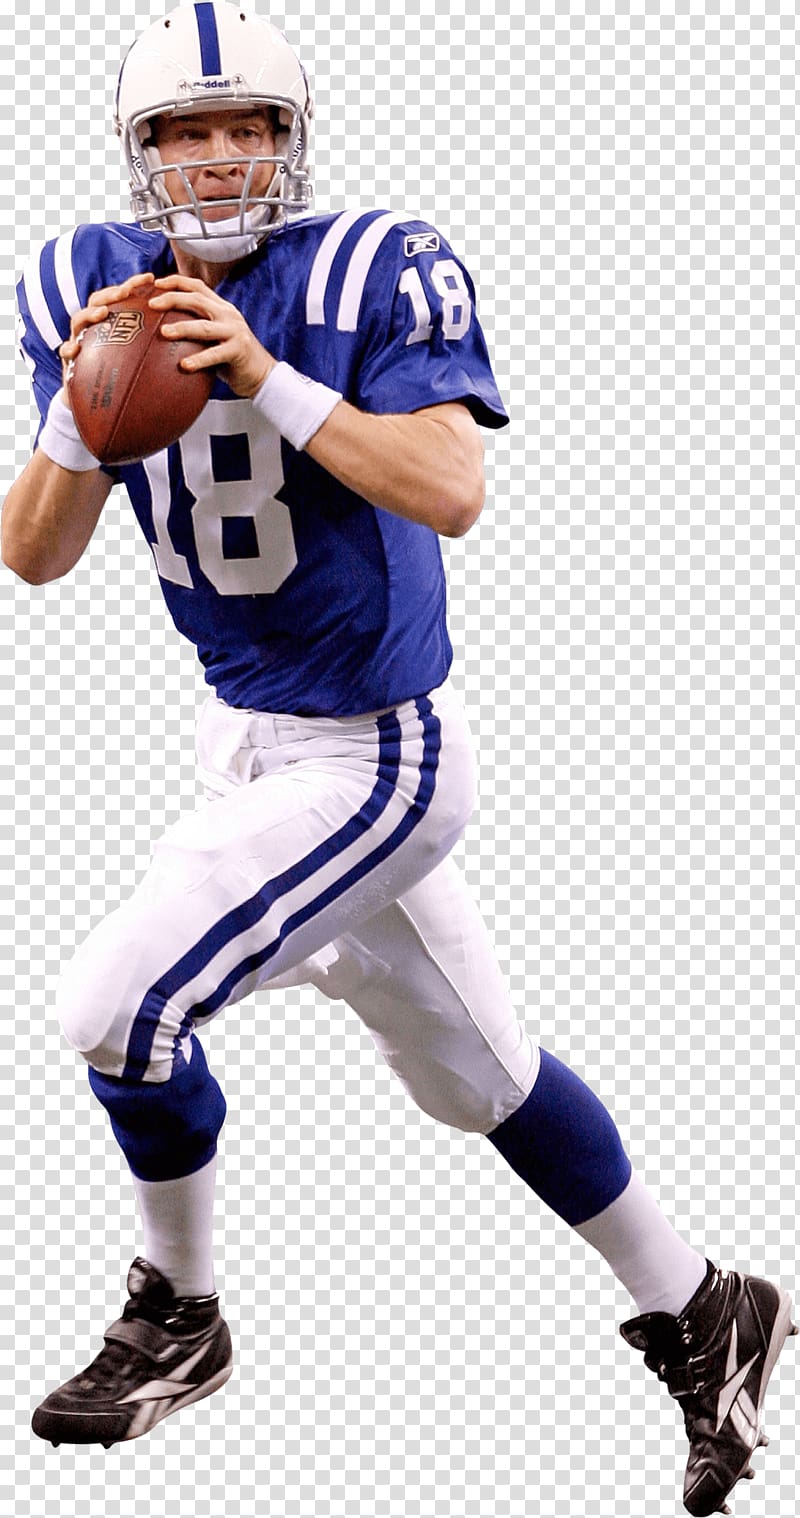 New York Giants Indianapolis Colts Football helmet Peyton Manning American football, American football player transparent background PNG clipart